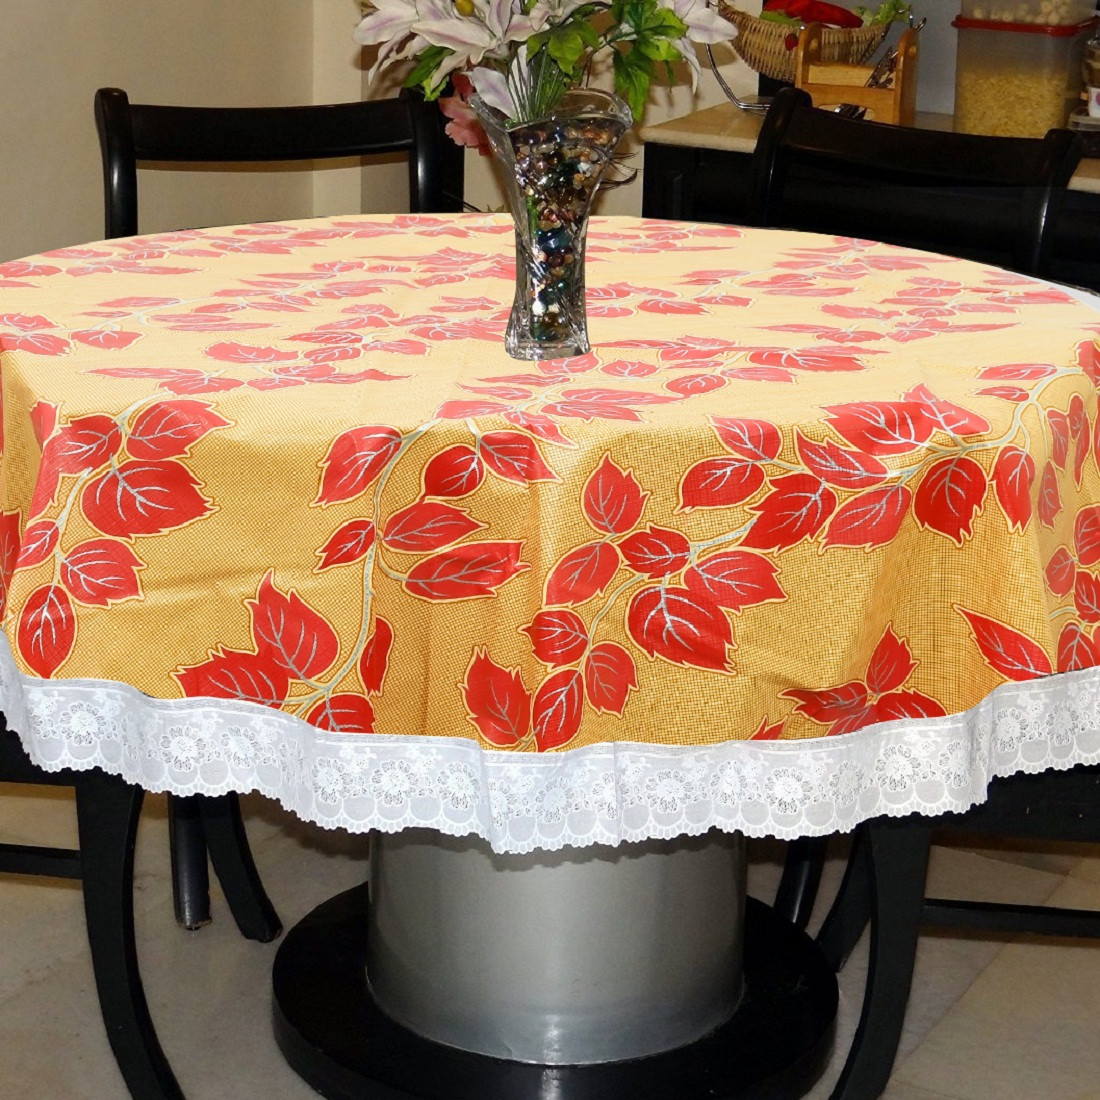 Kuber Industries Leaf Print Round Table Cover 72 Inch-Waterproof PVC Resistant Spillproof PVC Fabric Table Cover for Dining Room Kitchen Party (Gold)-KUBMRT11821